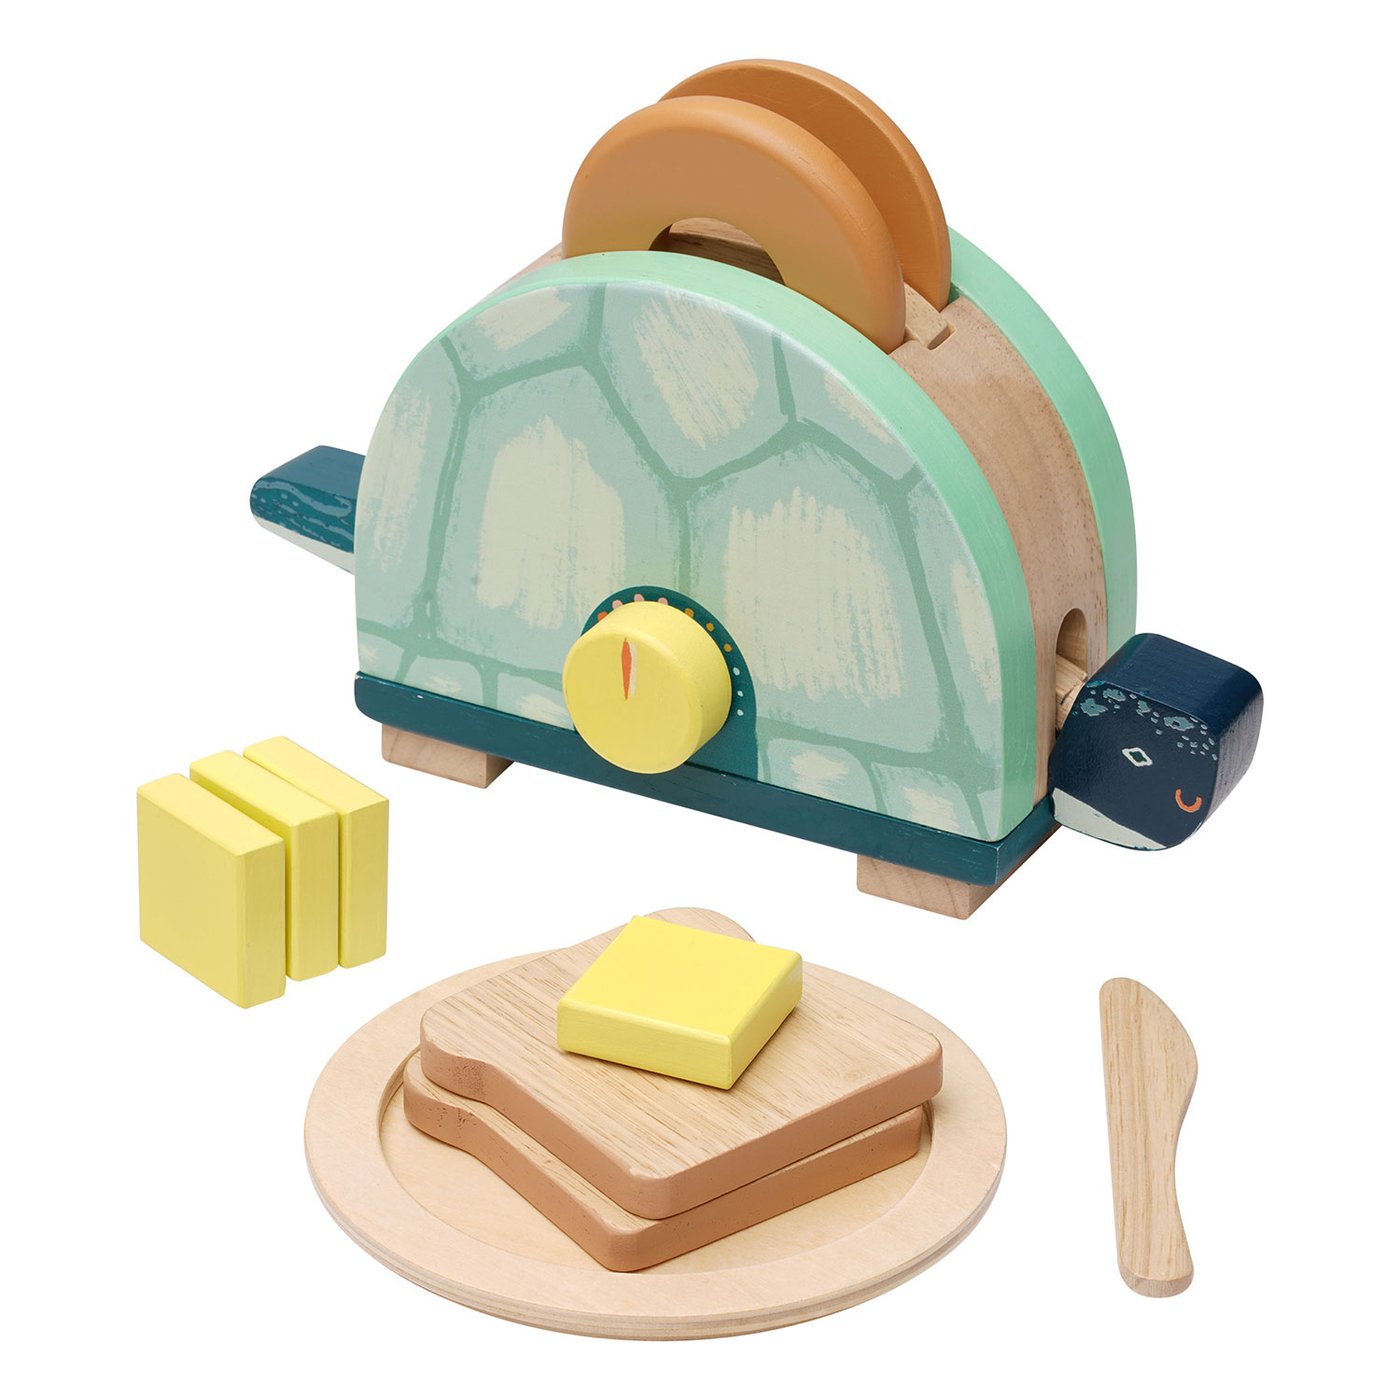 Toasty Turtle - Toaster With Bread and Butter    